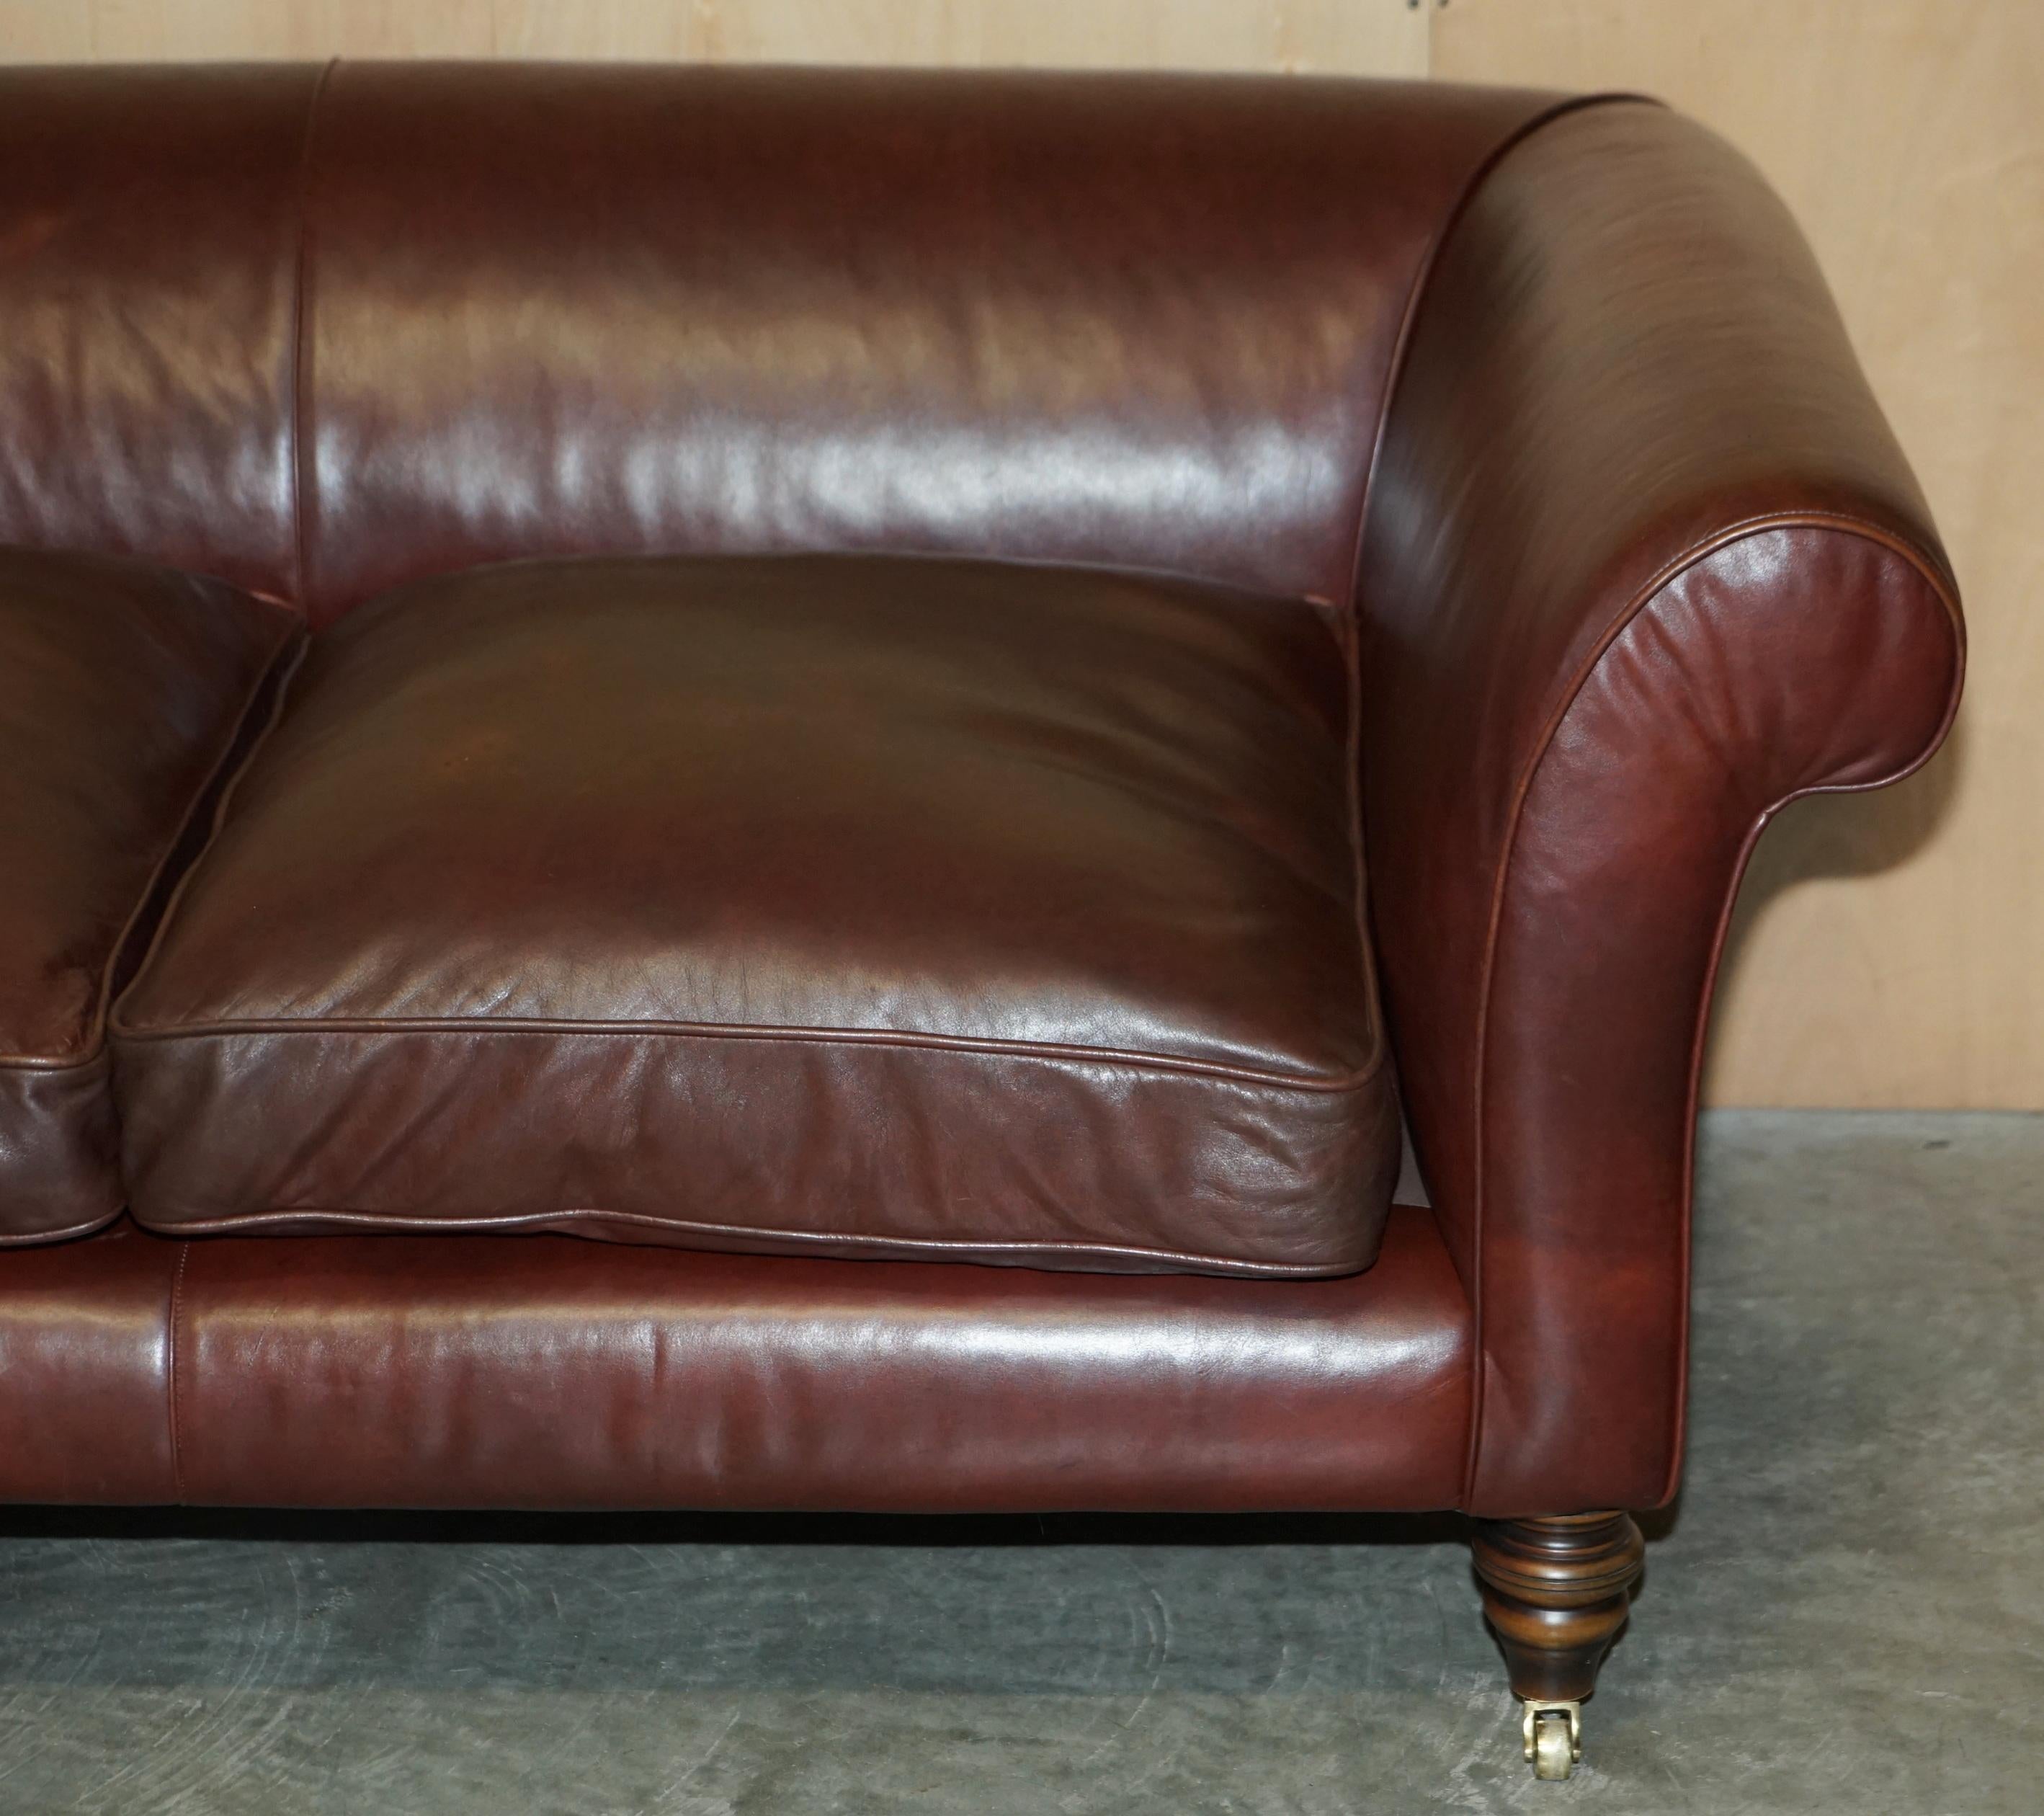 ViNTAGE HANDDYED BROWN LEATHER ART DECO THREE SEAT SOFA FEATHER FILLED SEATHER (Englisch) im Angebot